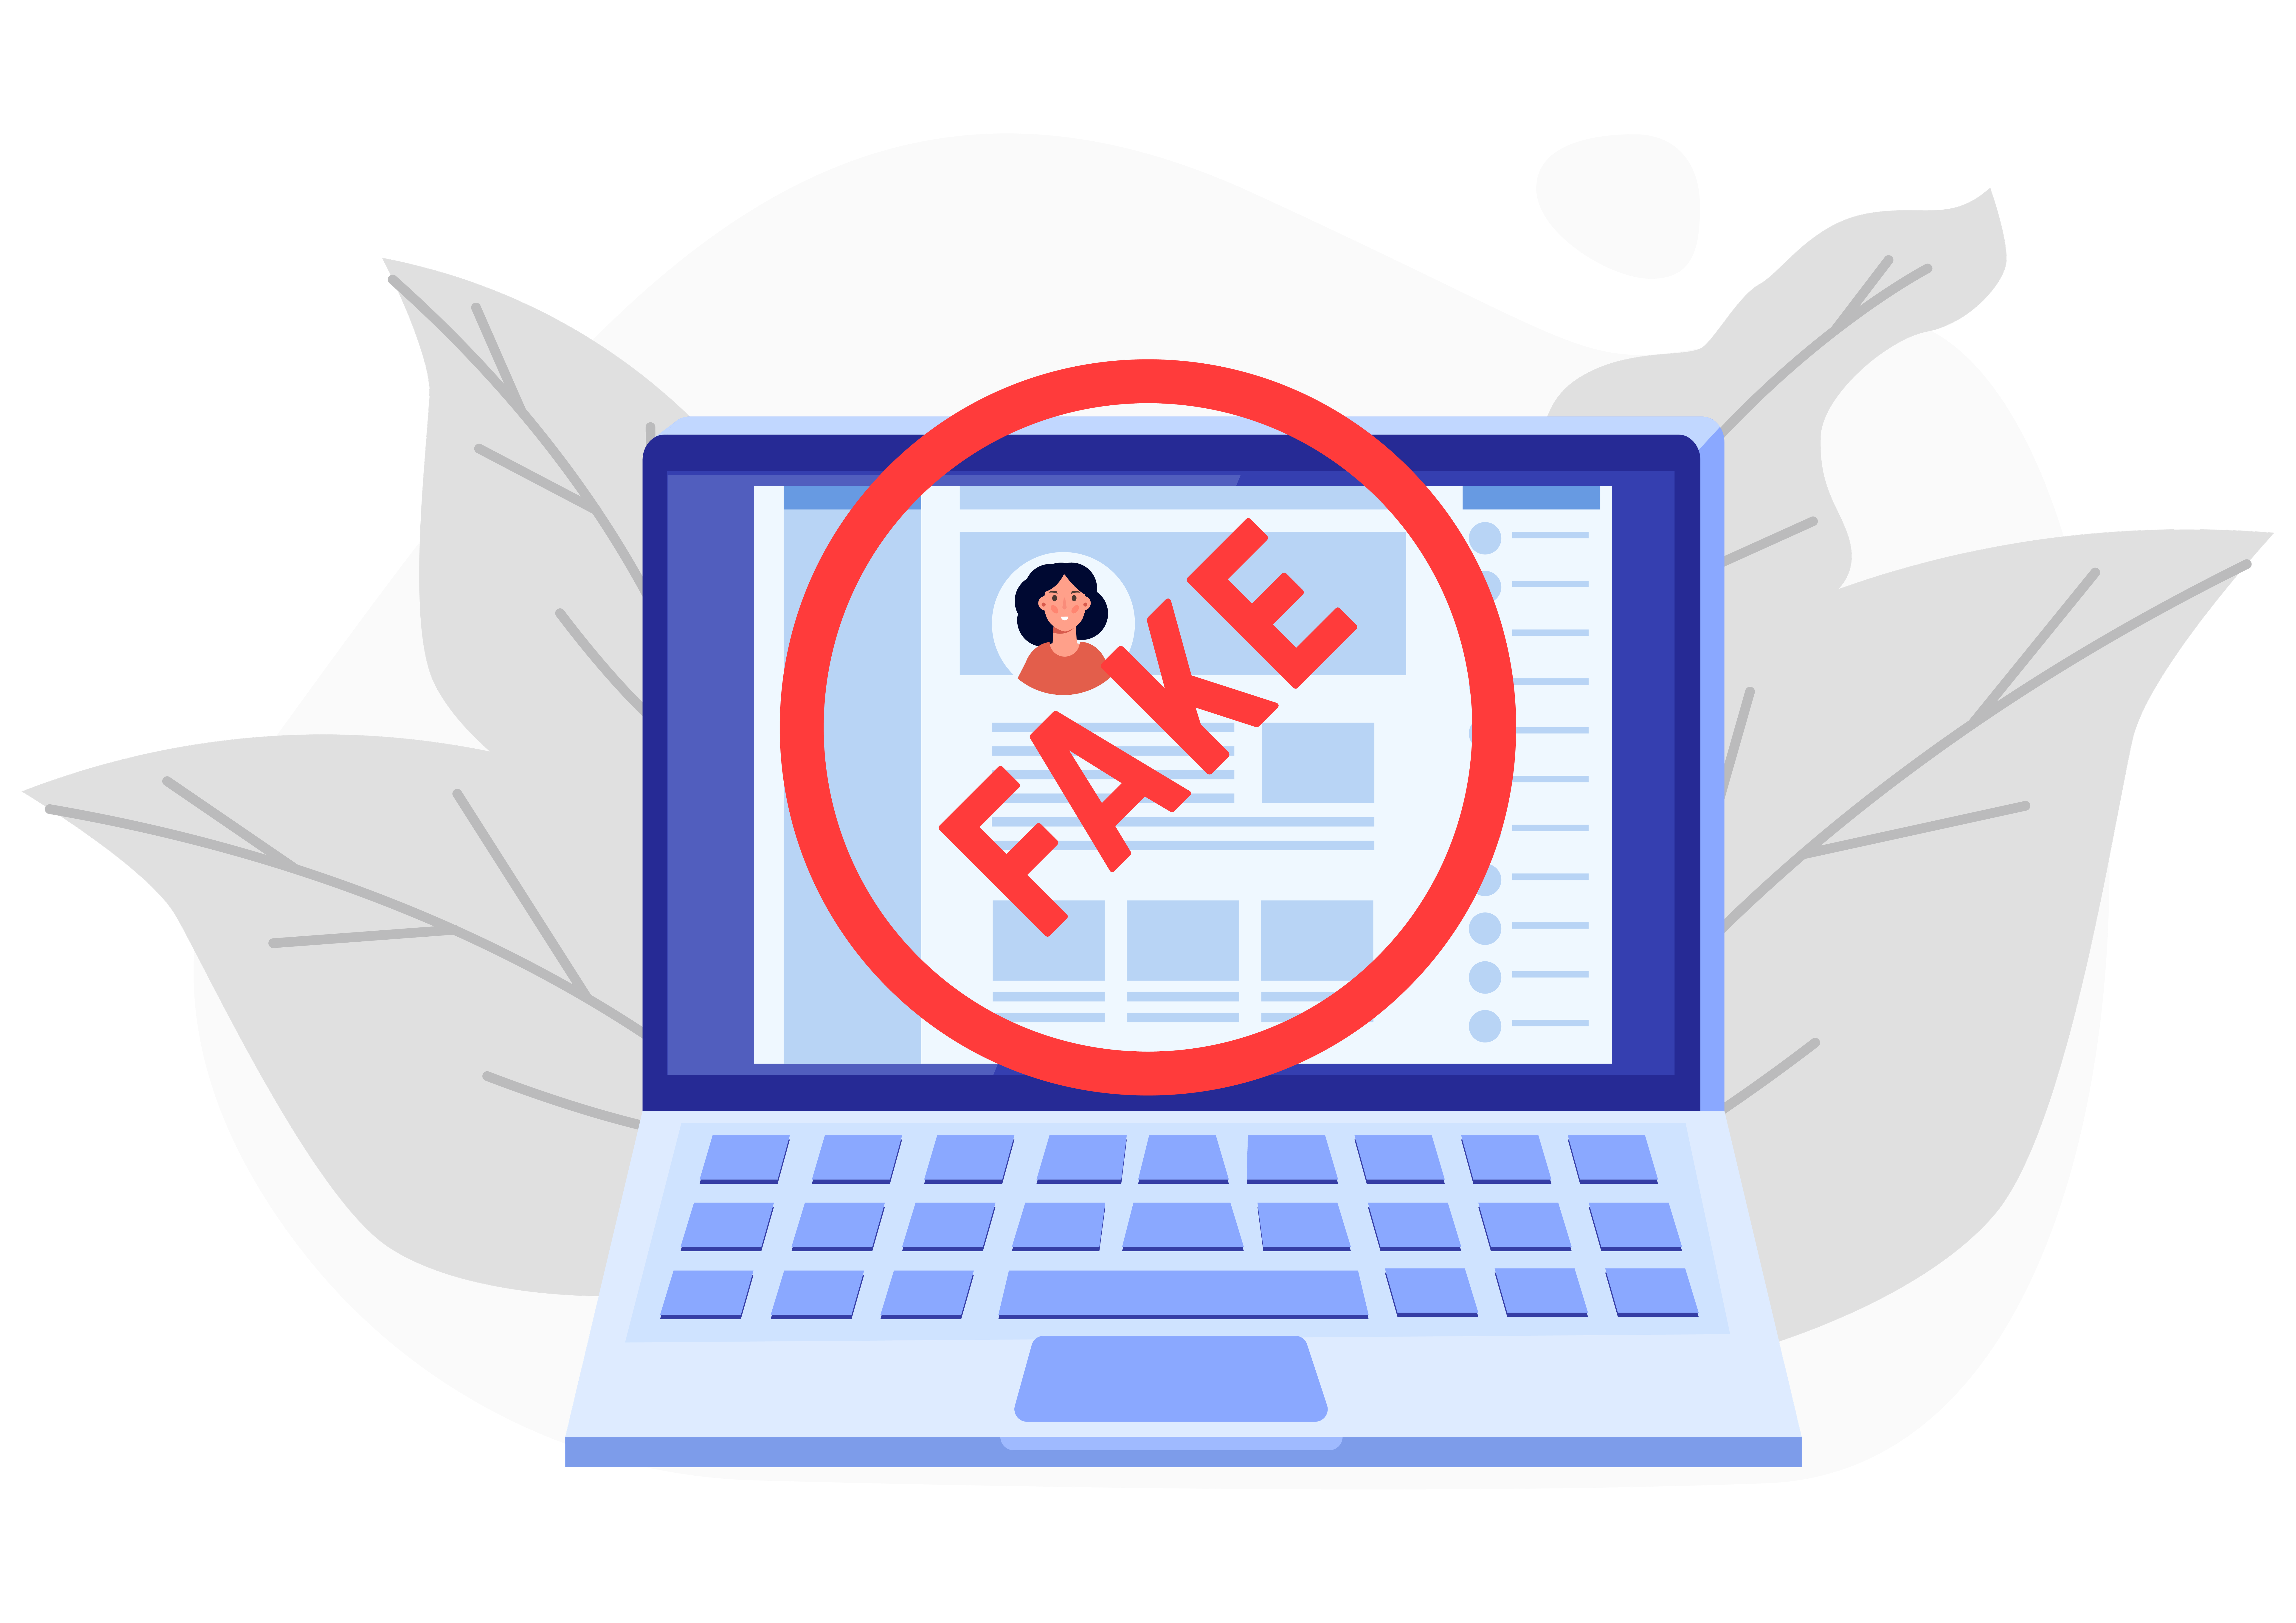 illustration of a laptop showing a Facebook profile on it that is stamped as fake